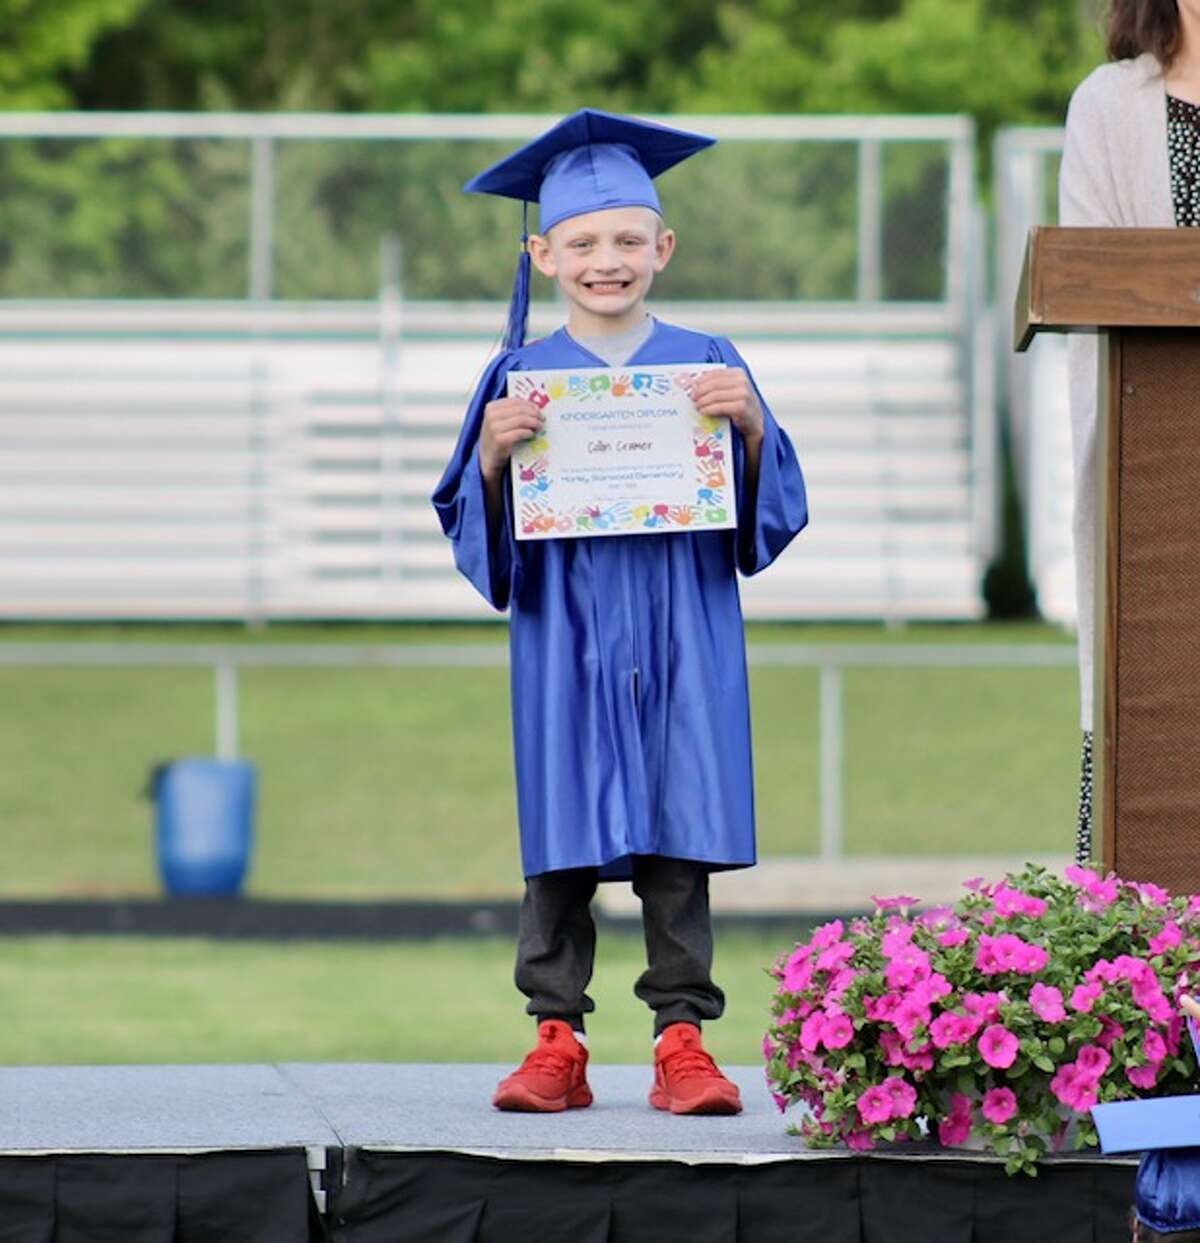 Morley Stanwood Elementary recently held its Kindergarten class graduation ceremony where parents and families watched their students celebrate completing an early education milestone. 